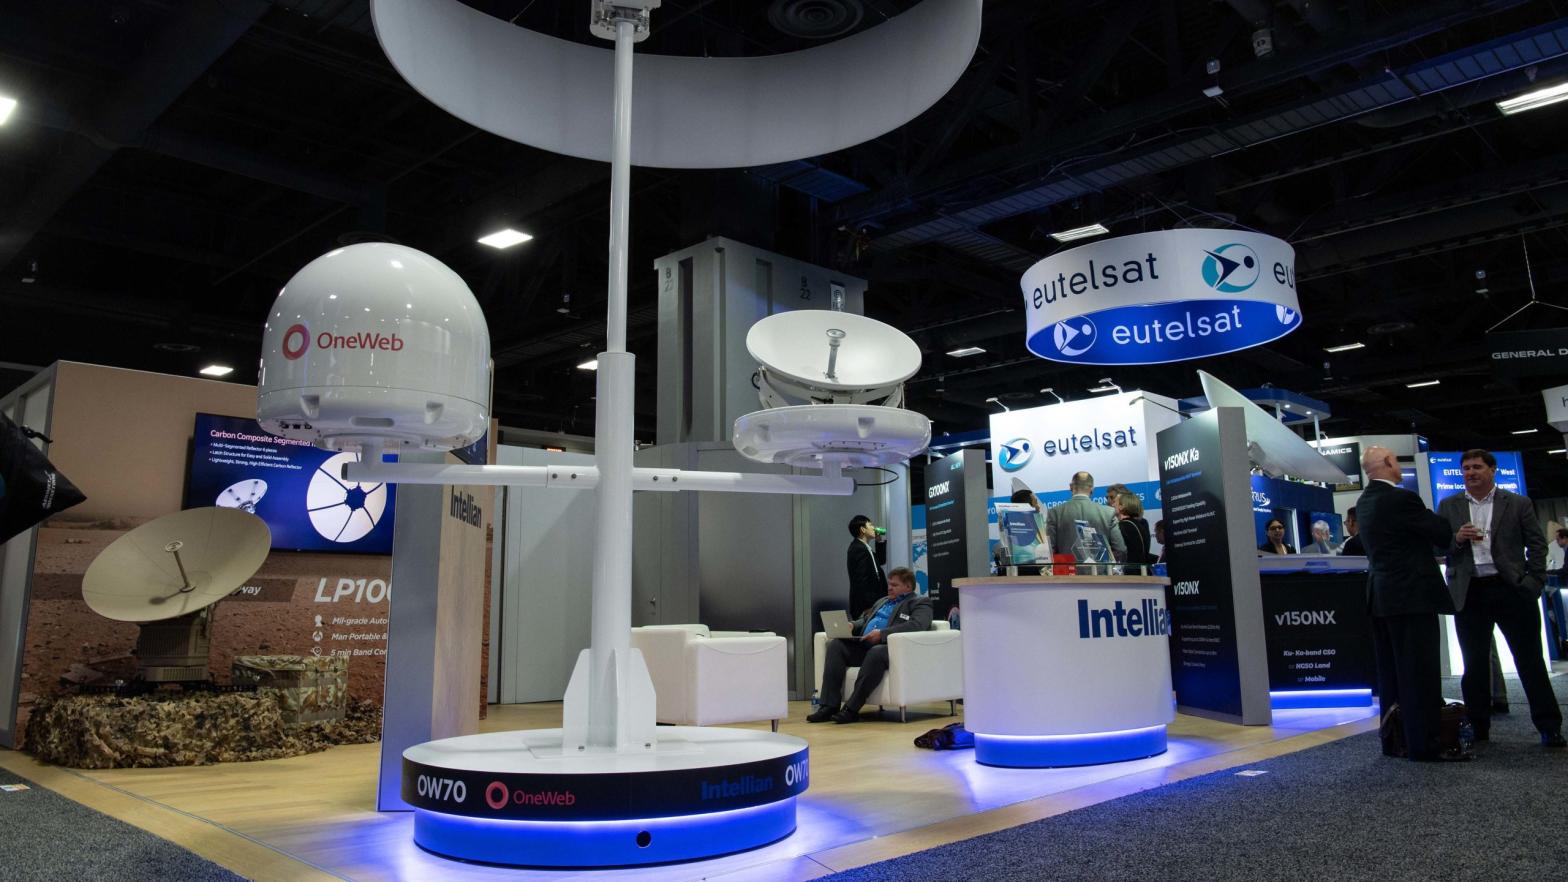 A ground antenna made by Intellian for the OneWeb space internet provider is seen at Satellite2019 in Washington, DC, on May 8, 2019. (Photo: Nicholas Kamm/AFP, Getty Images)